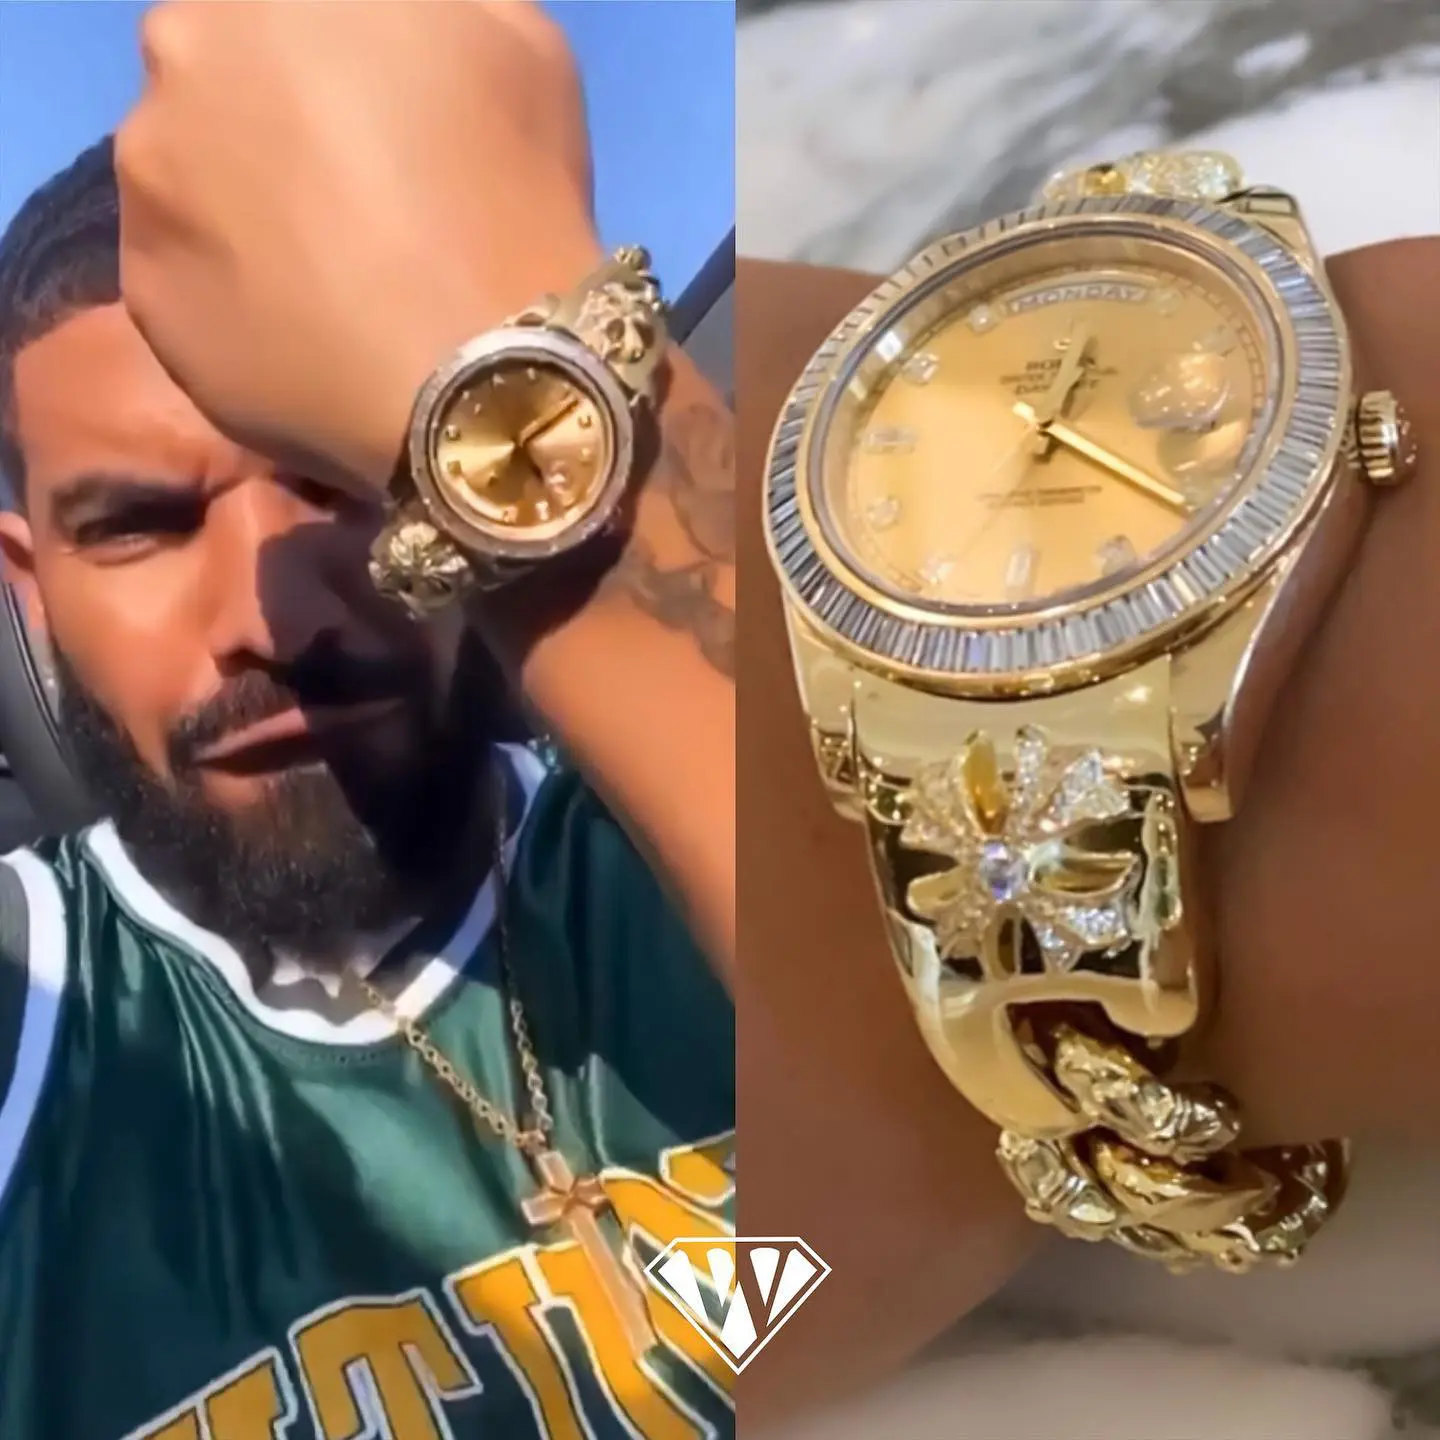 gøre det muligt for Ring tilbage klip Rich Flex: Drake, 21 Savage - who has the better watch collection?